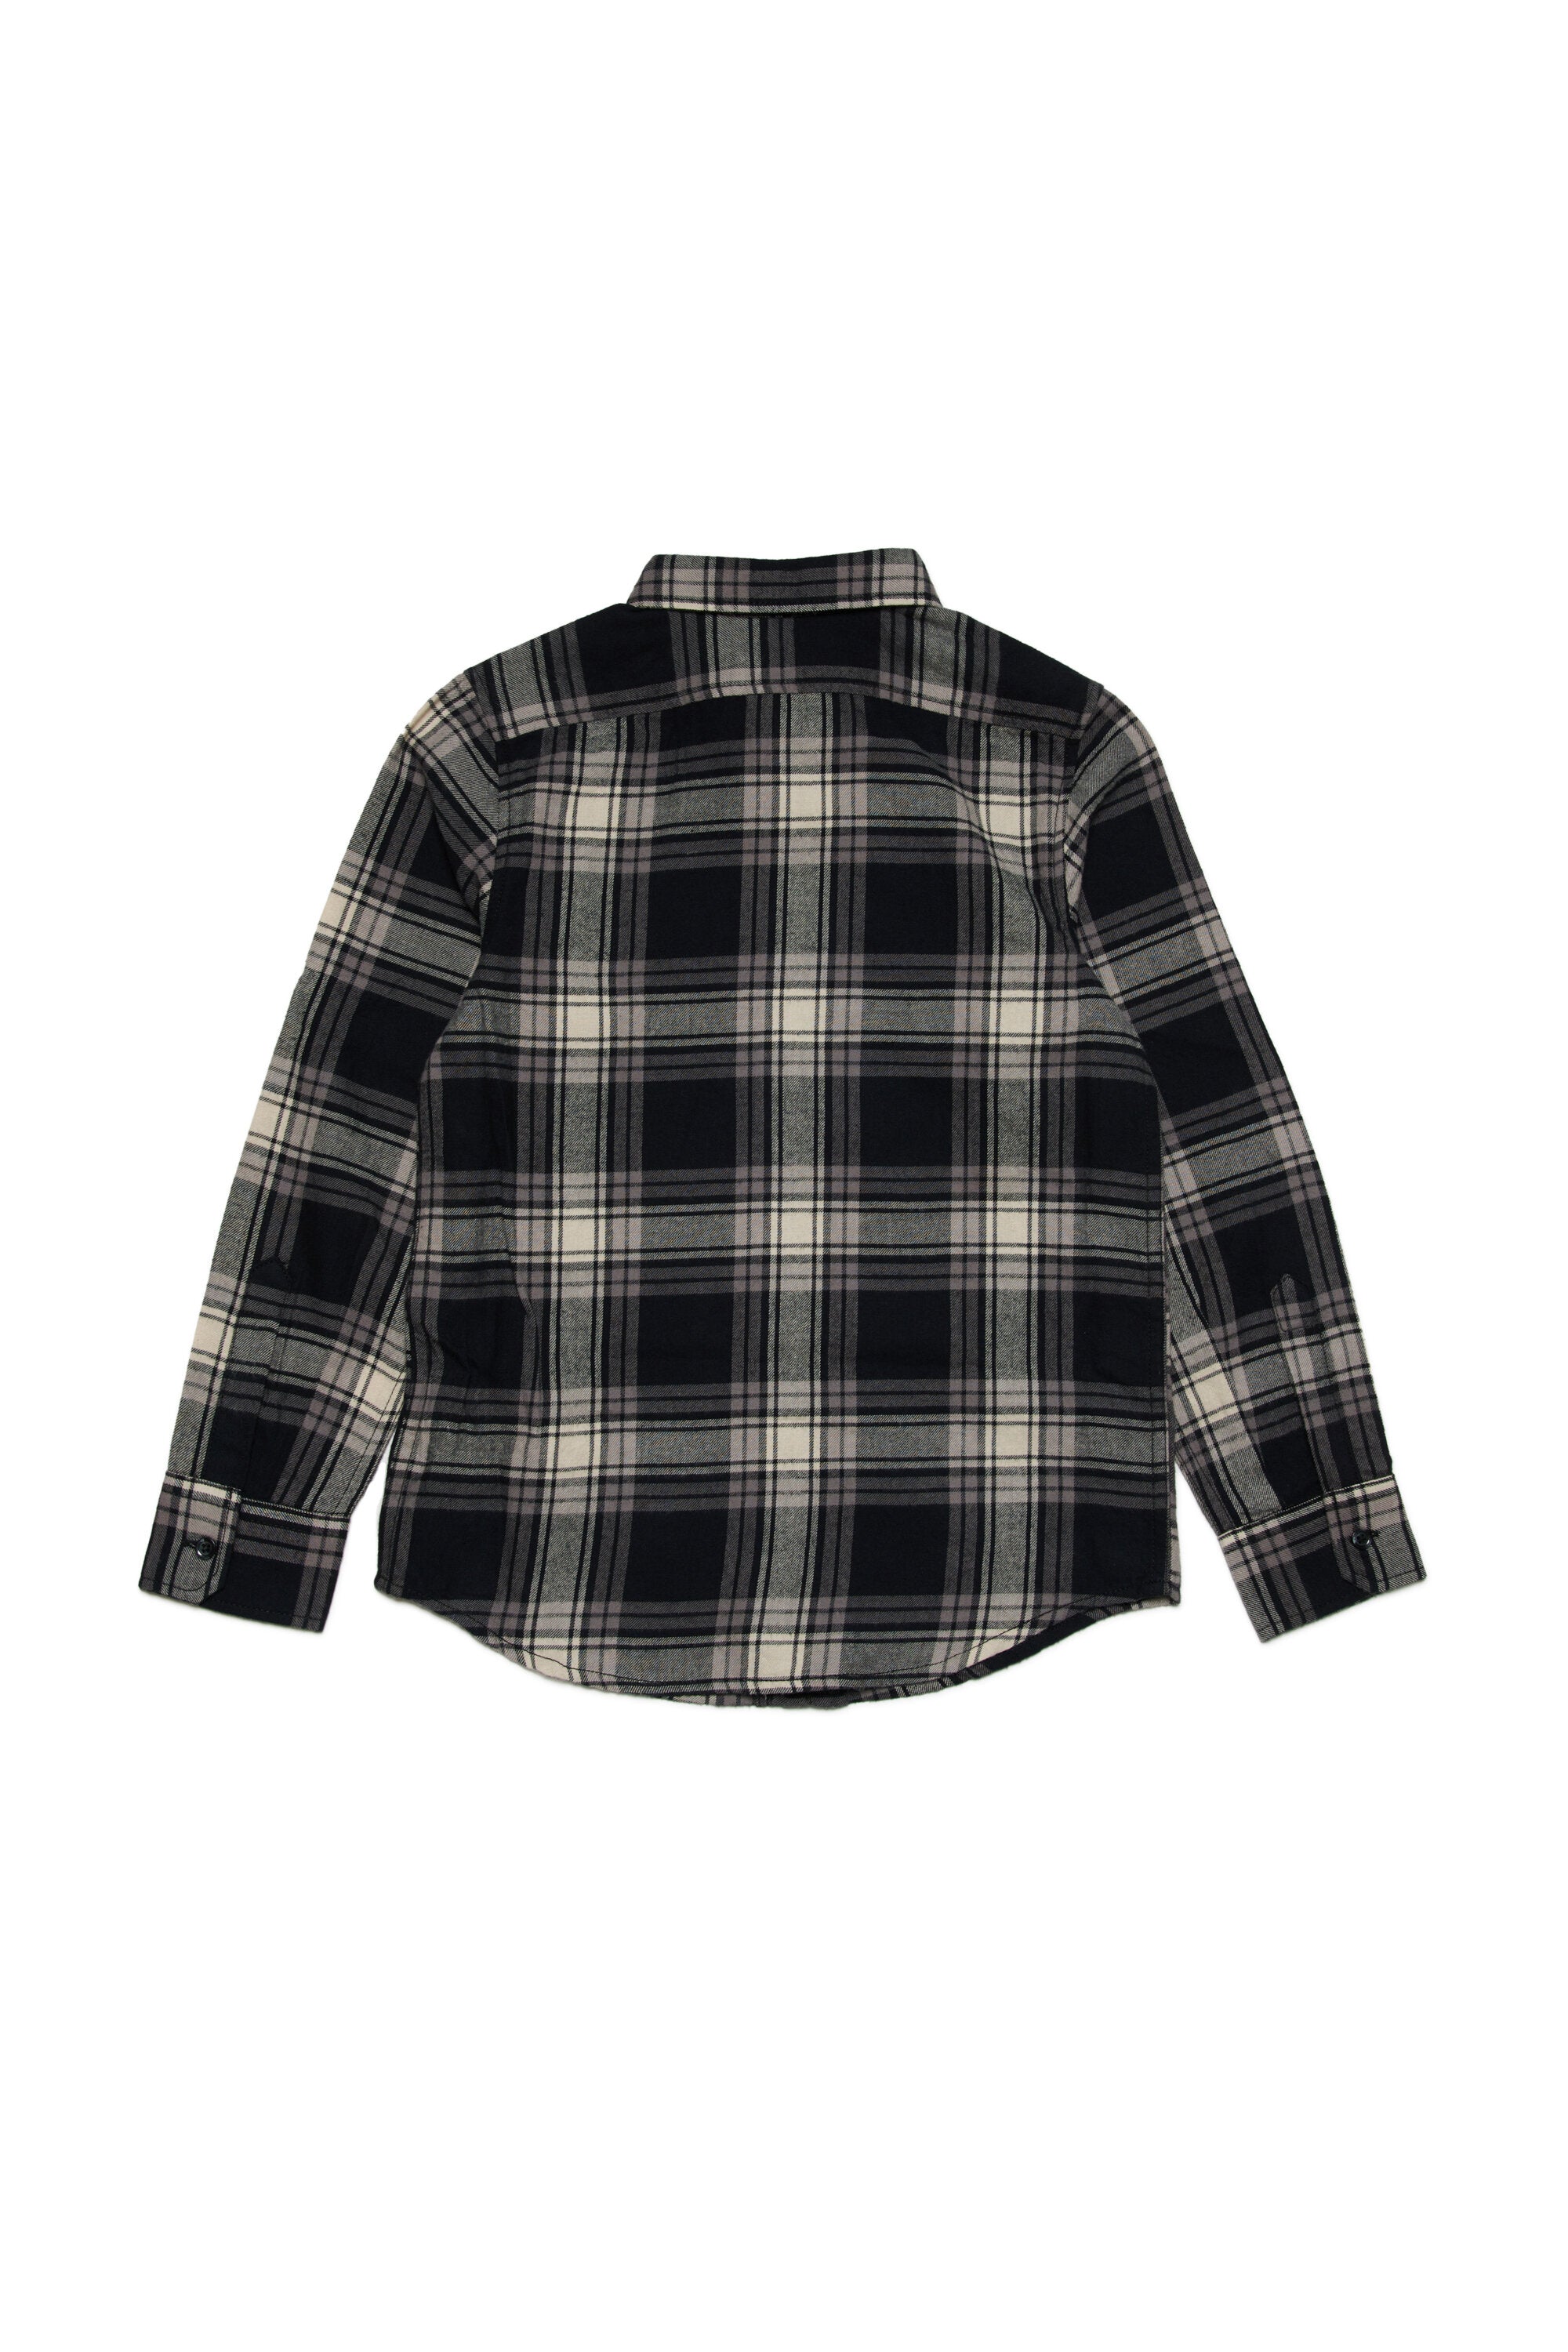 Plaid flannel shirt with Oval D logo